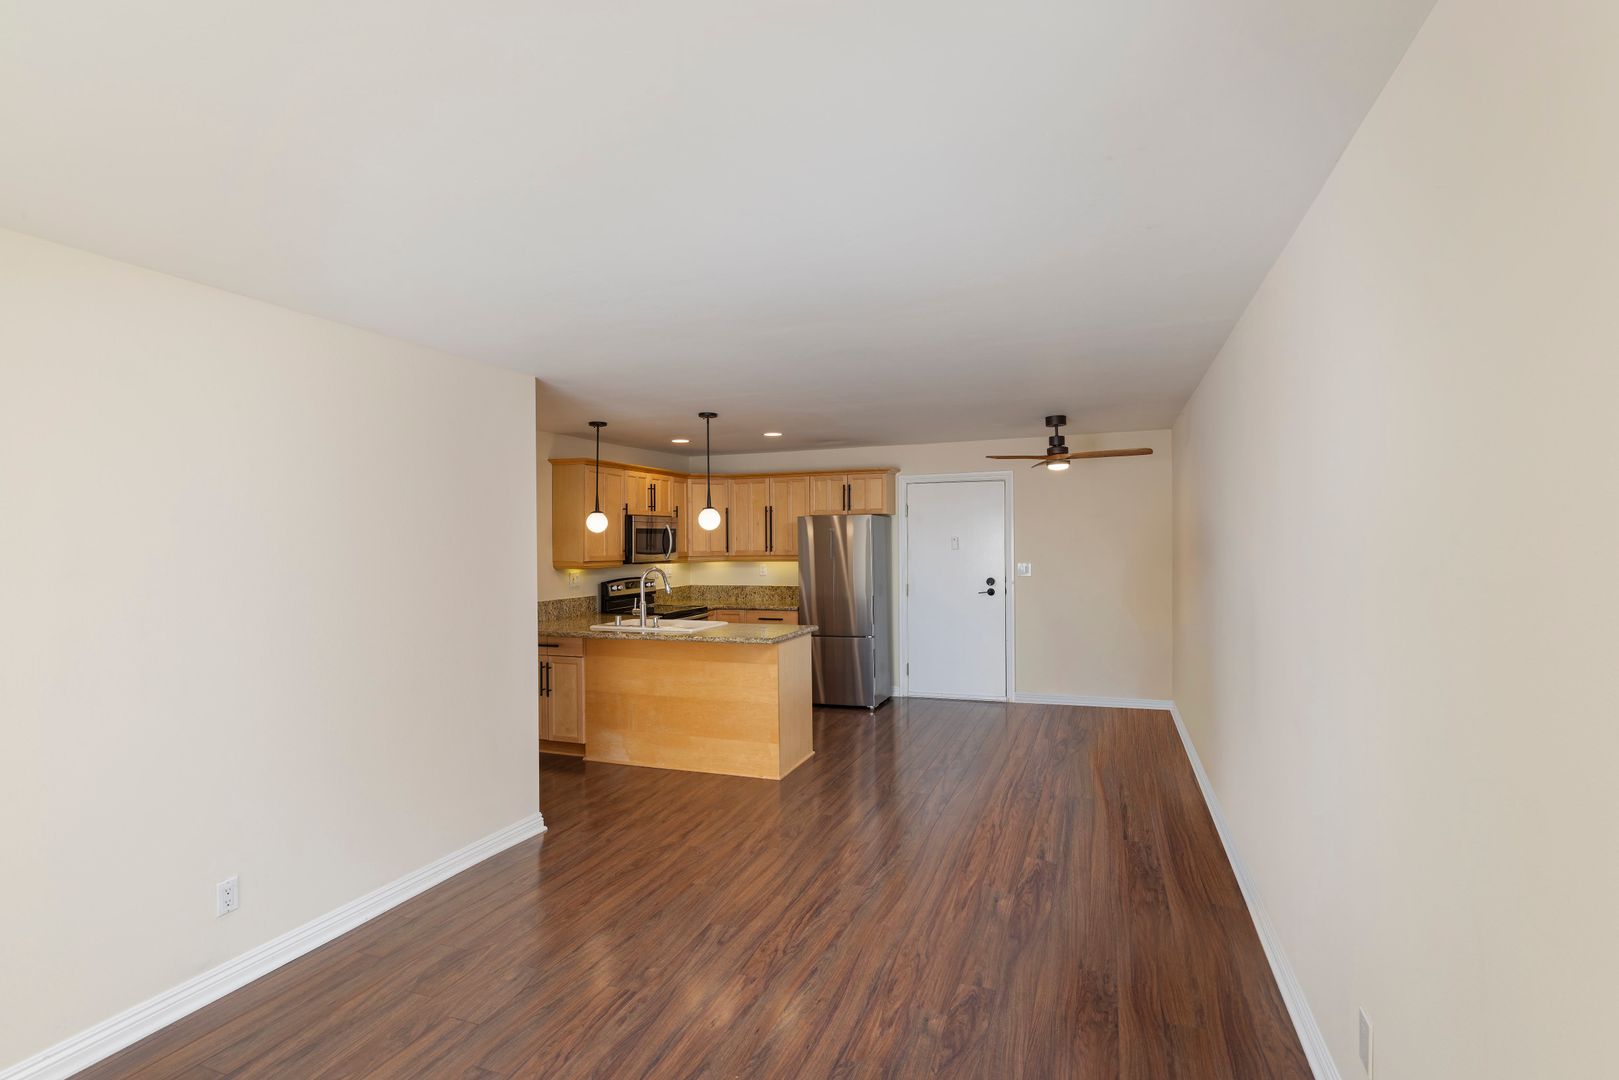 Available 1 Bedroom/1 bathroom remodled Condo in Long Beach!!